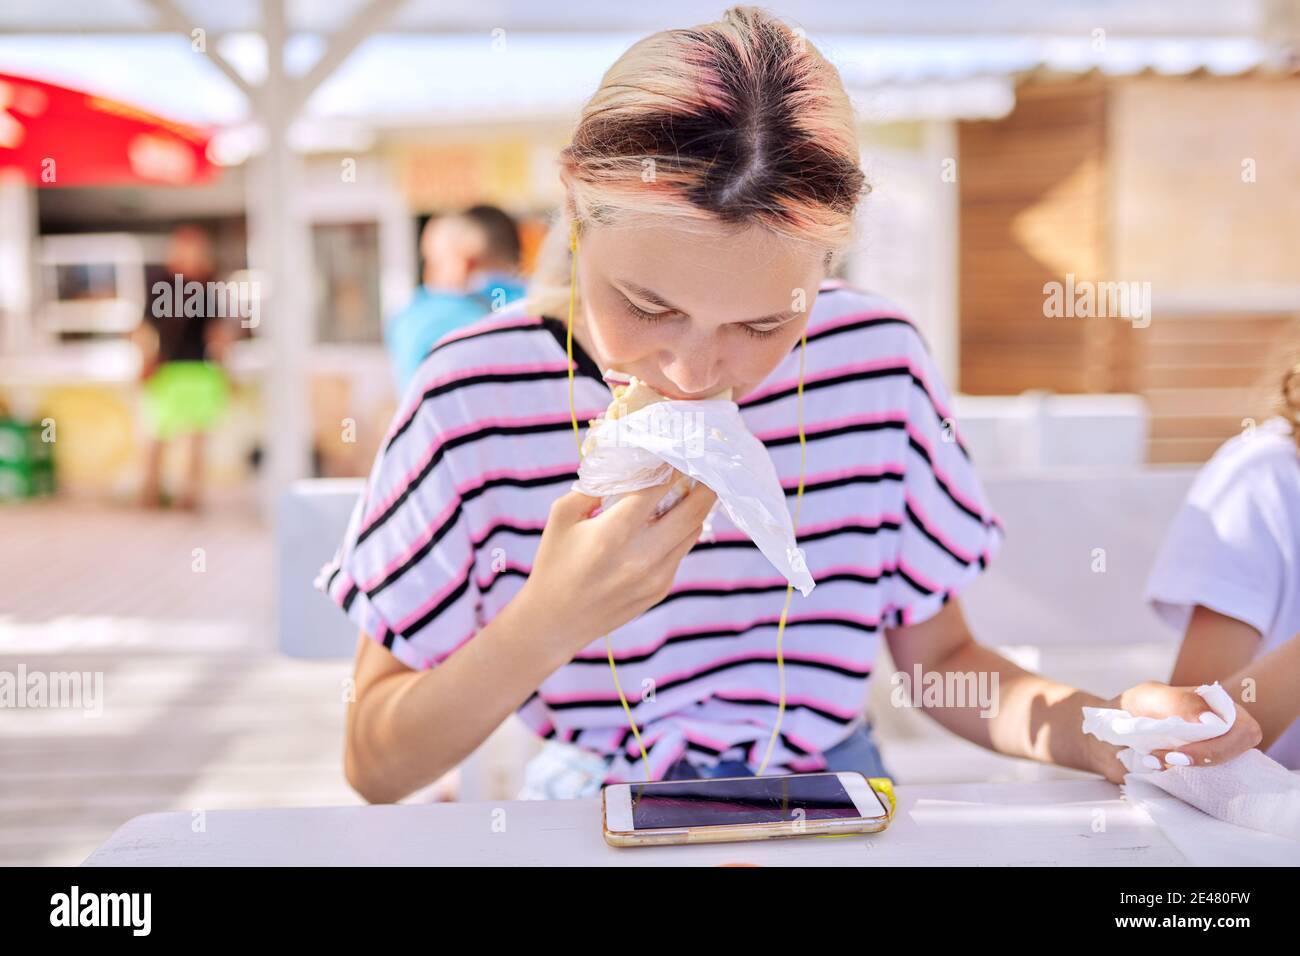 Teen girl eating a sandwich, burger, looking at the smartphone screen in headphones Stock Photo